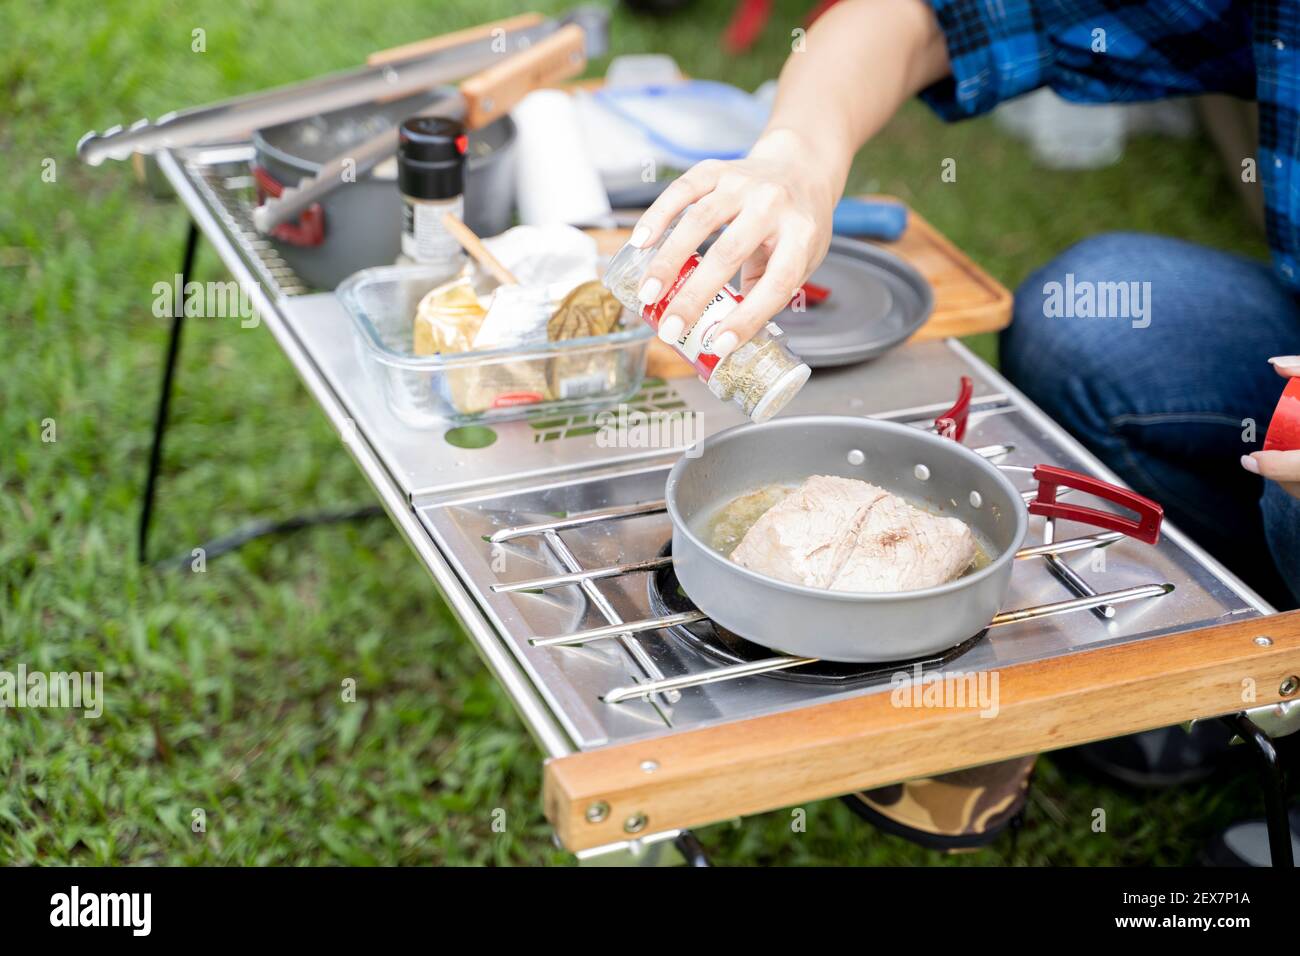 Barbecue in the campground. Stock Photo